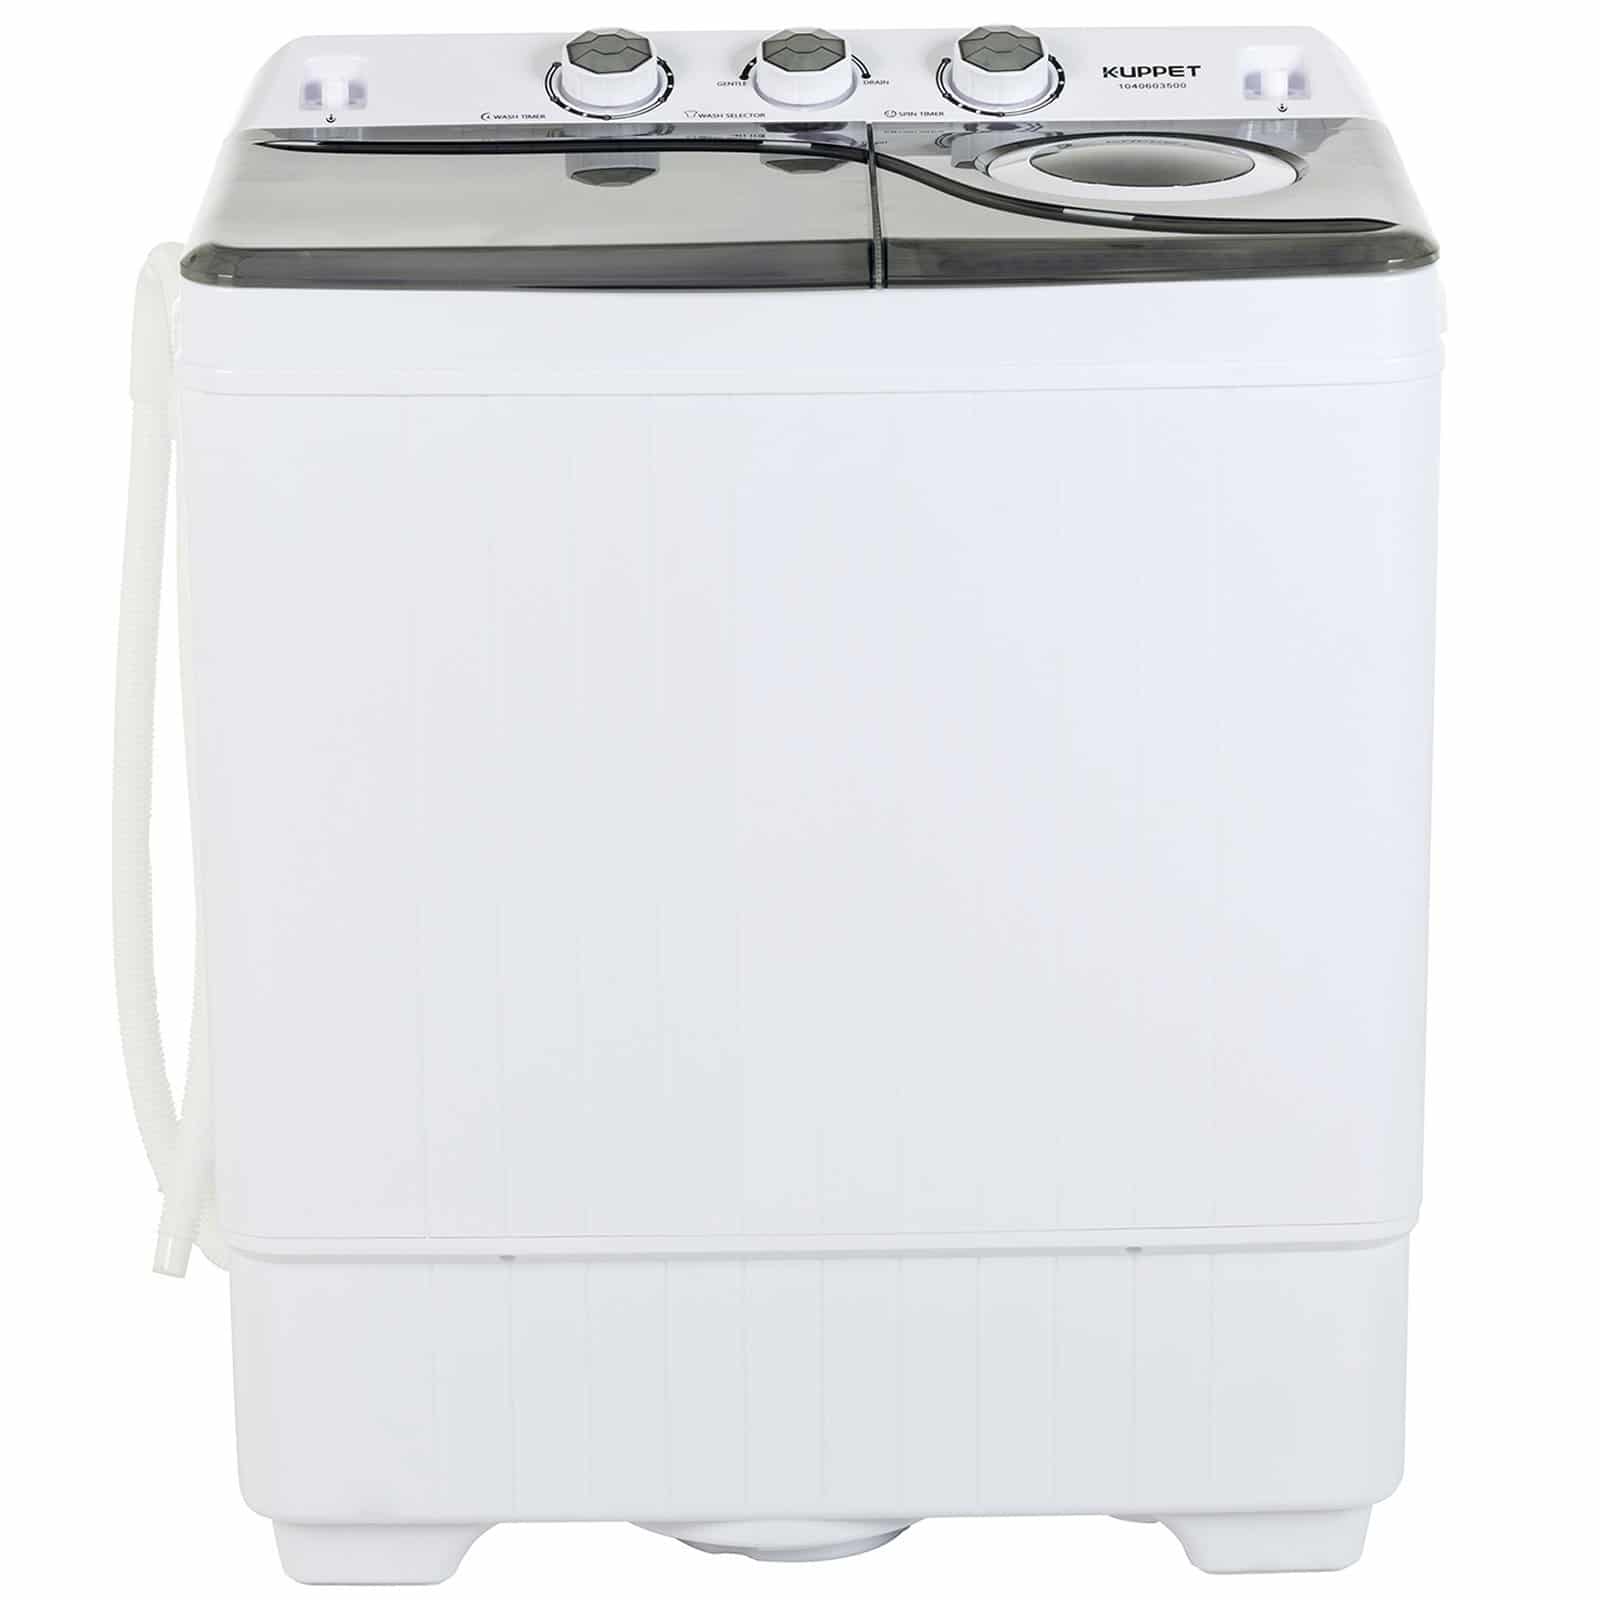 KUPPET Compact Twin Tub Portable Mini Washing Machine 26lbs Capacity, Washer(18lbs)&Spiner(8lbs)/Built-in Drain Pump/Semi-Automatic (White&Gray) A2ZBucket 7